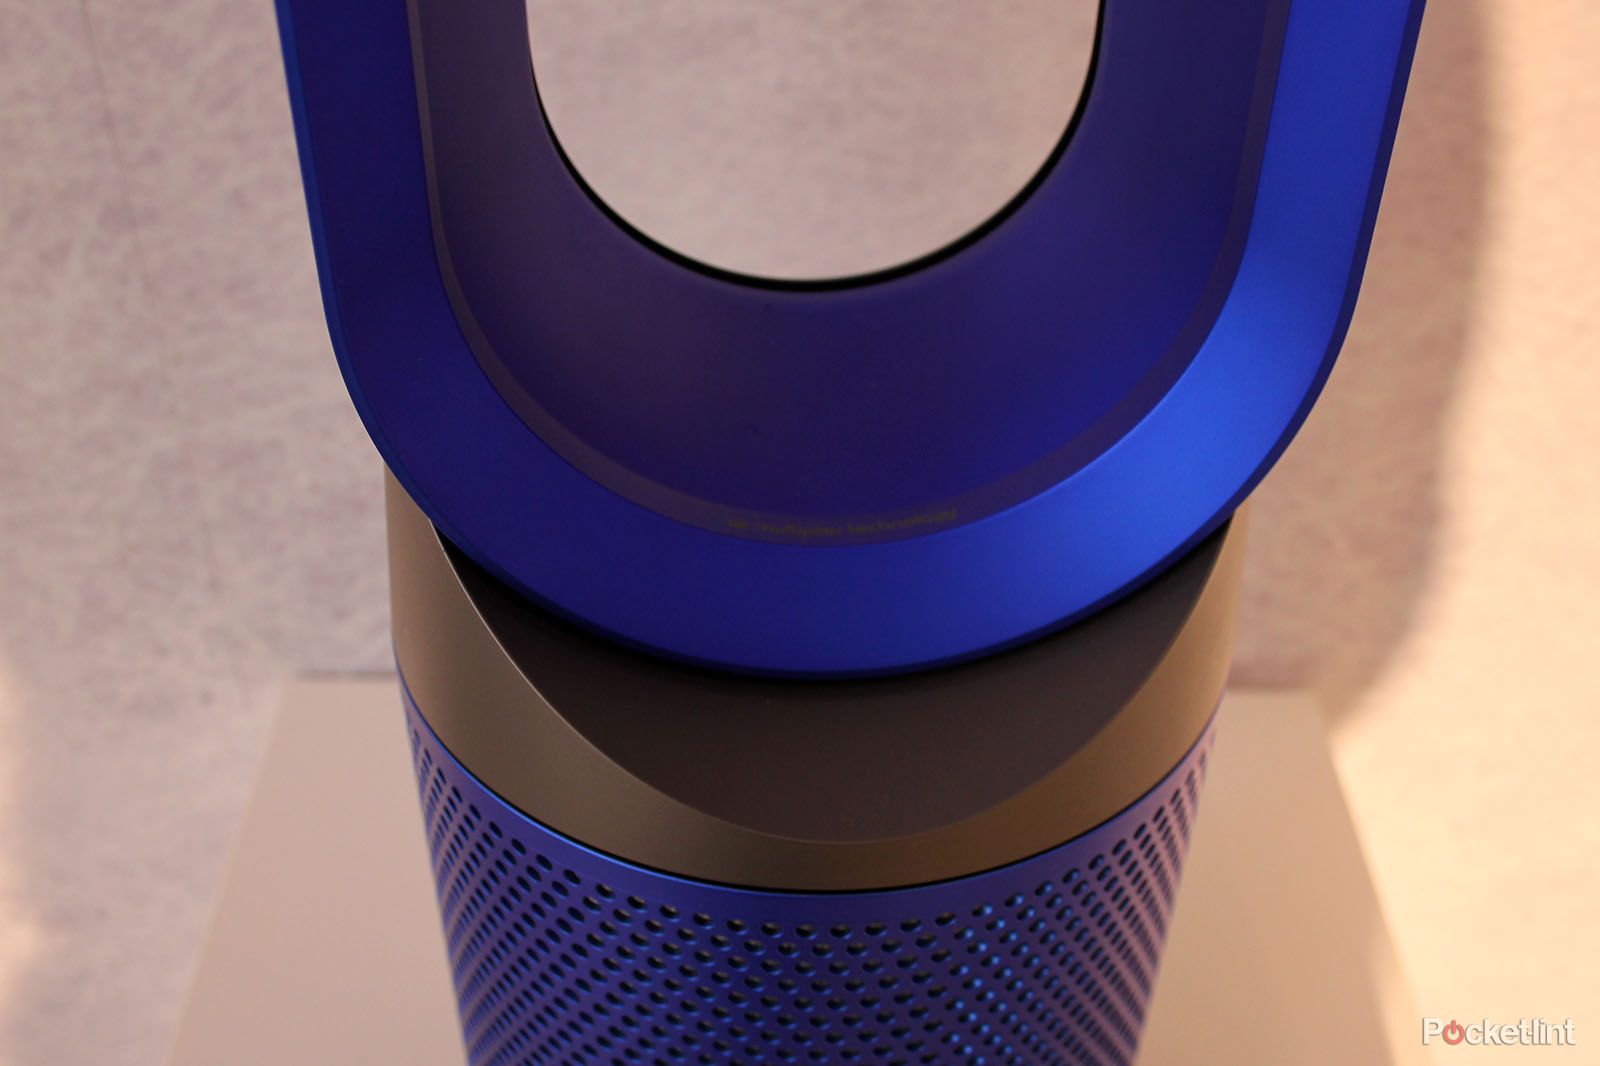 dyson pure cool link purifier will give you an unpolluted connected home image 3